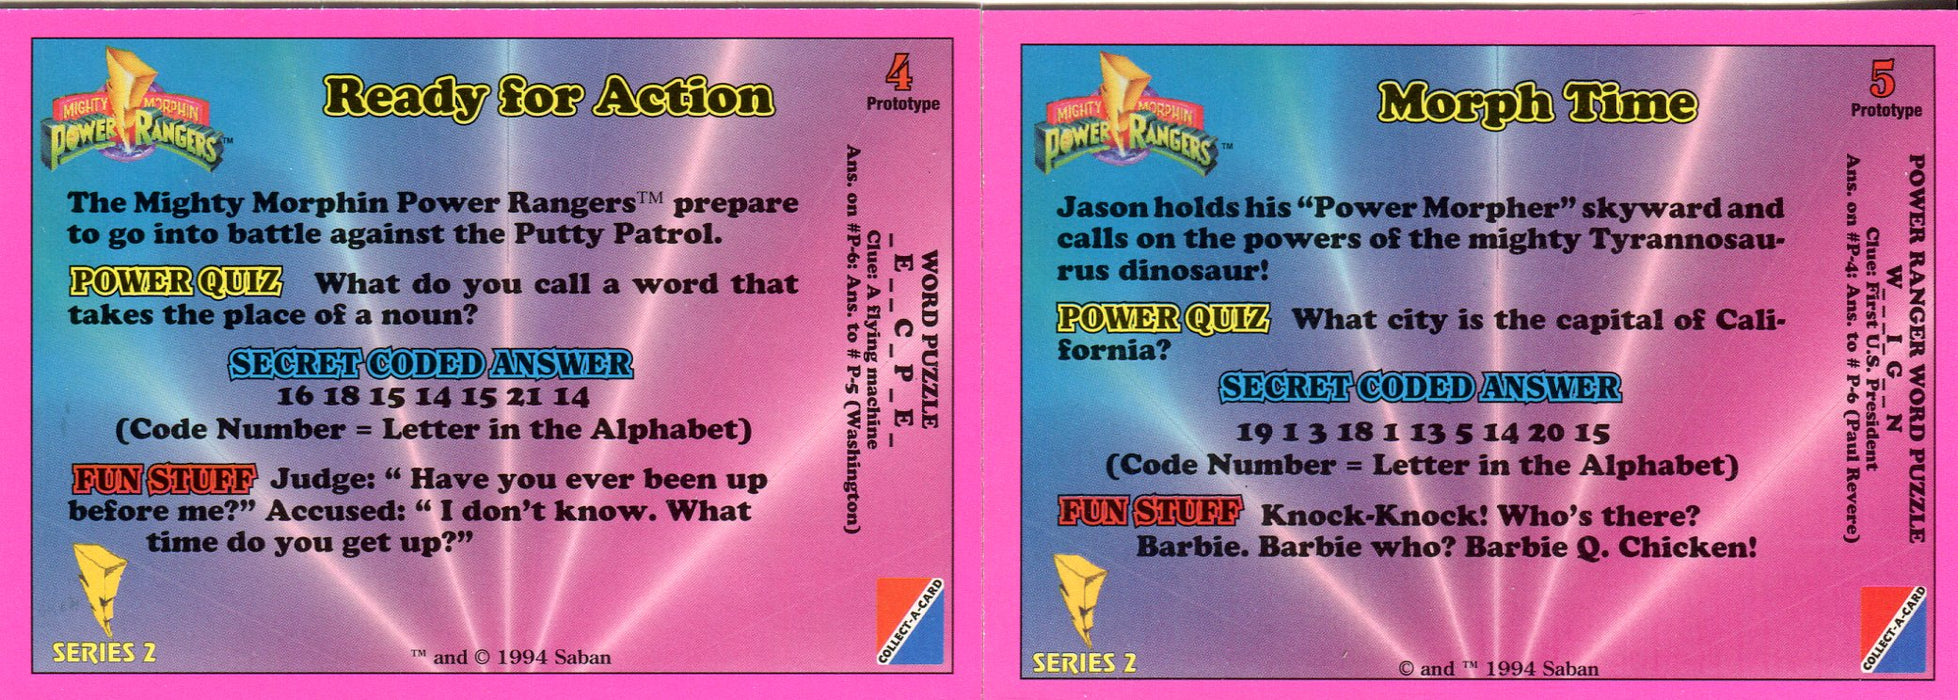 Power Rangers Series 2 Hobby Promo Card Lot 2 Cards #4 and #5 1994   - TvMovieCards.com